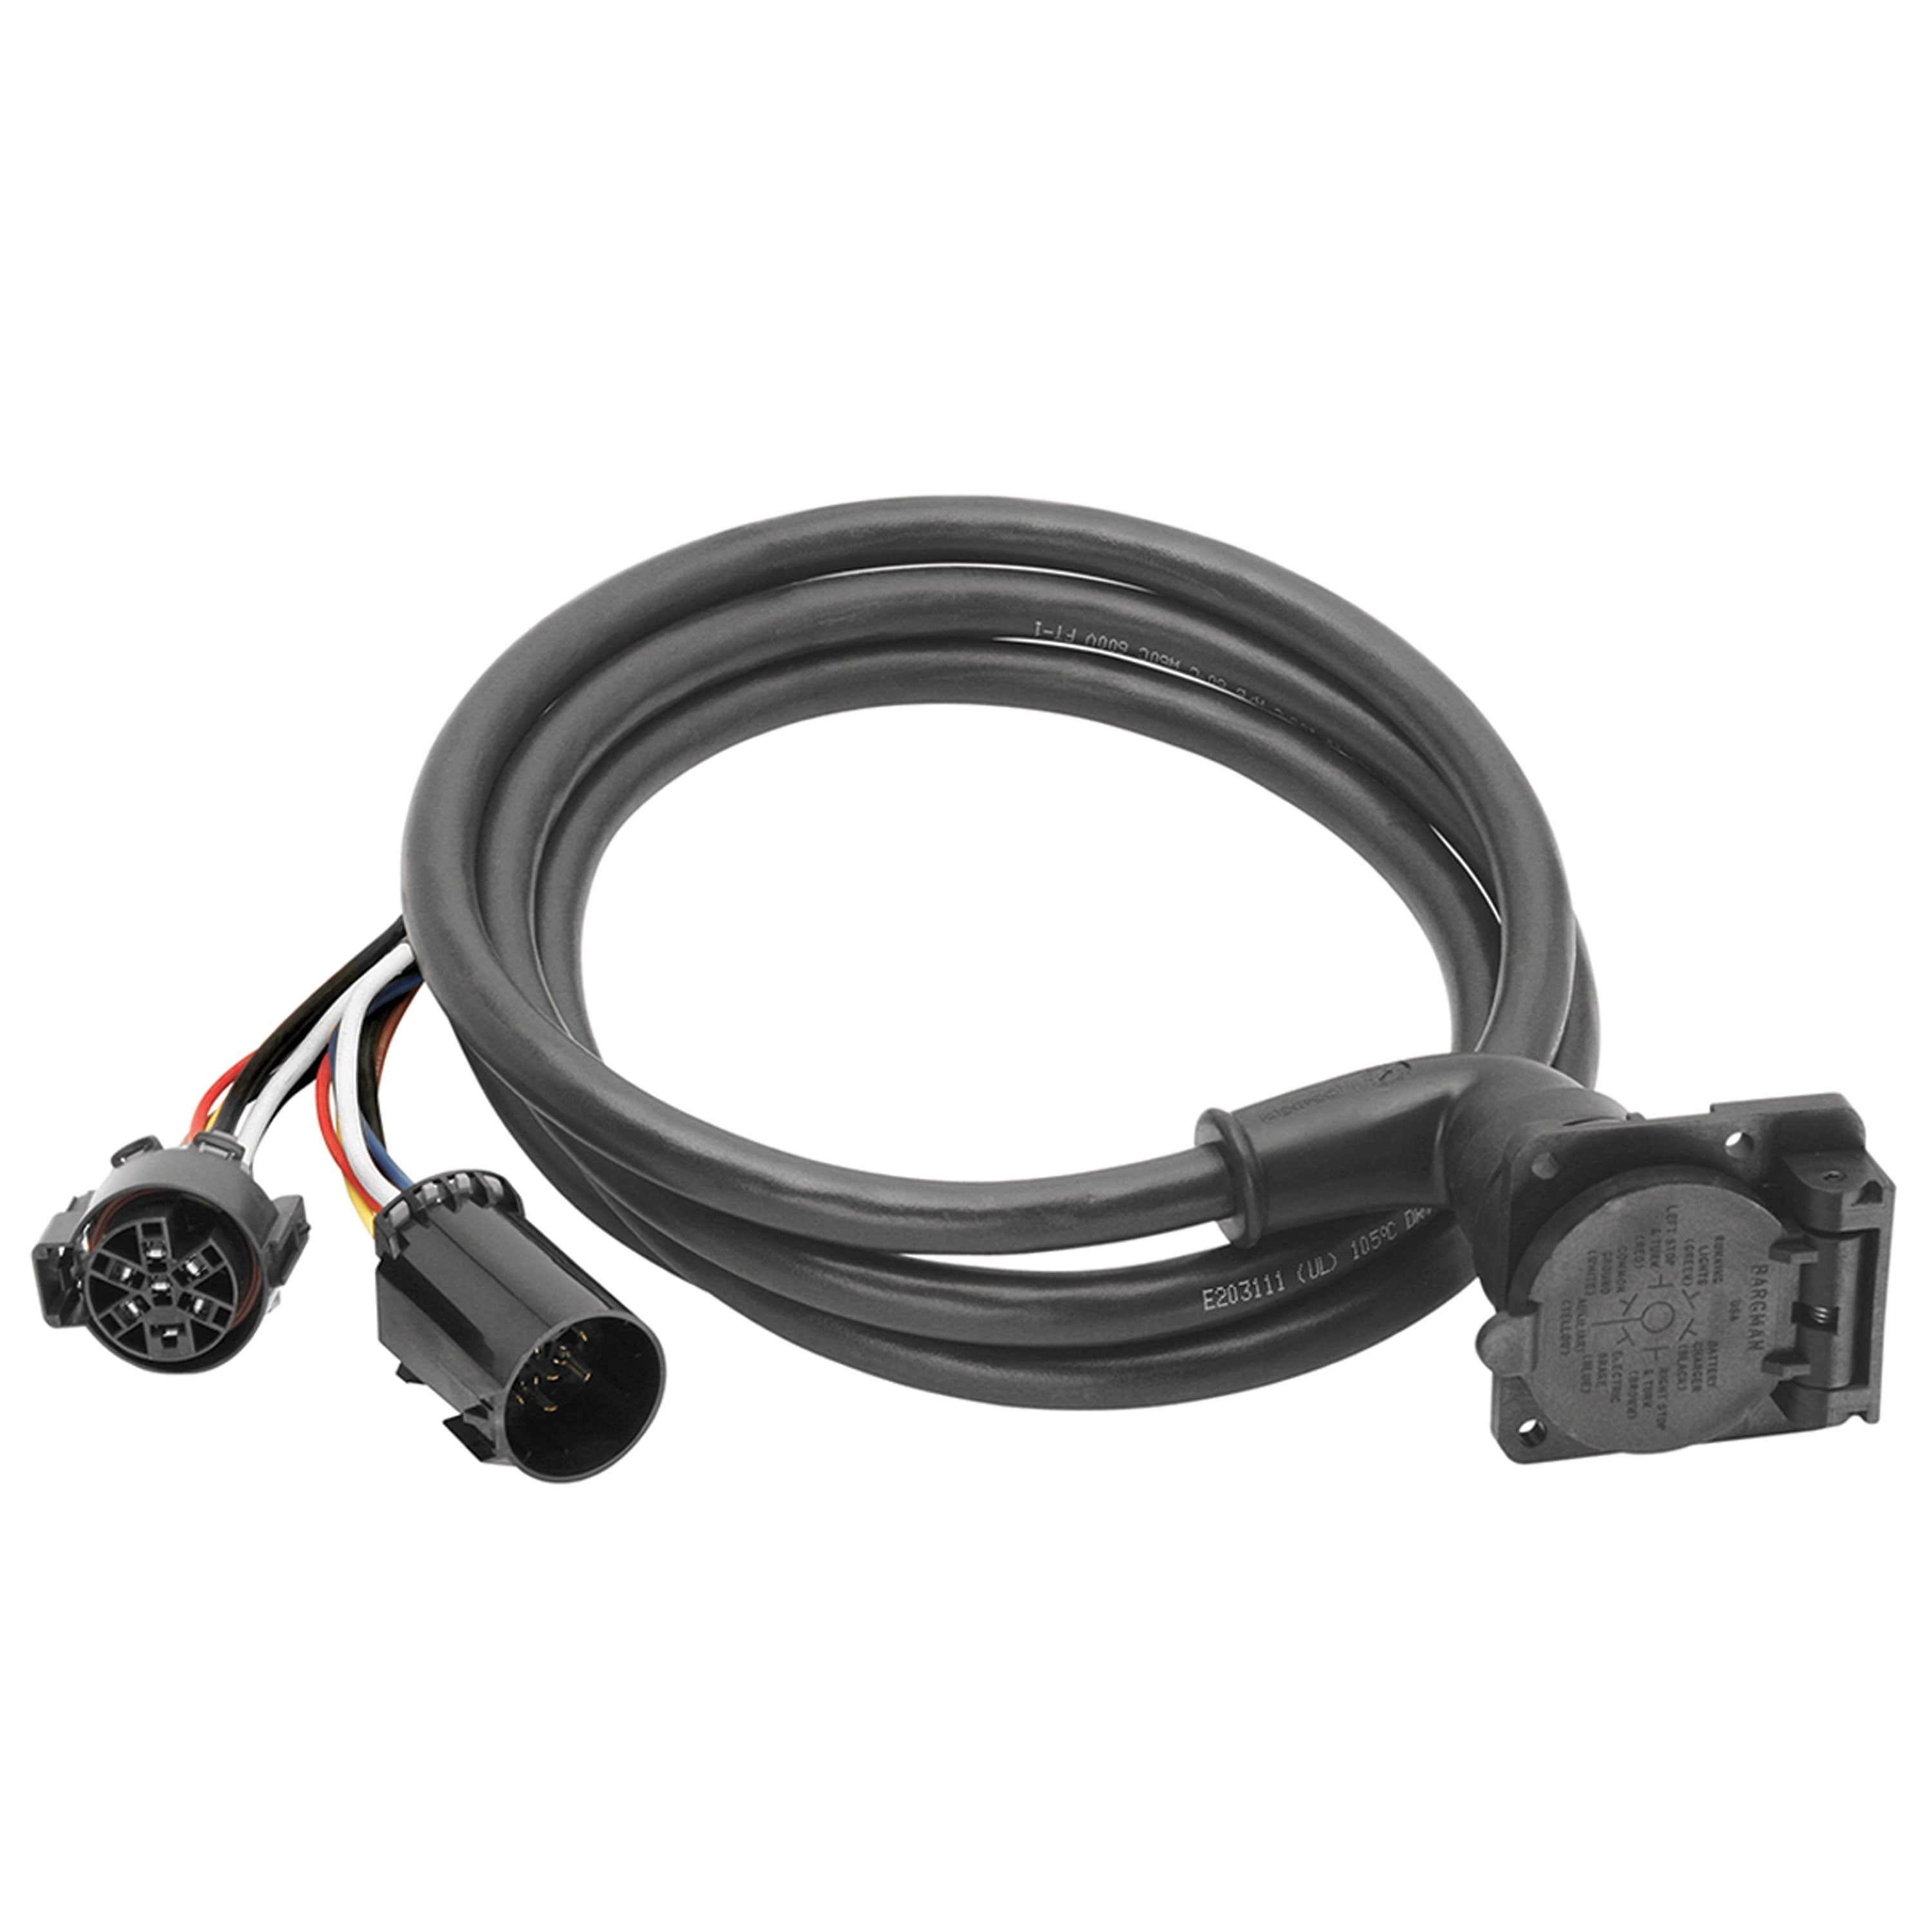 Bargman 51-97-410 7-Way 90Â° Fifth Wheel Adapter Harness w/ 9' Cable - Dodge, Ford, GM, Toyota